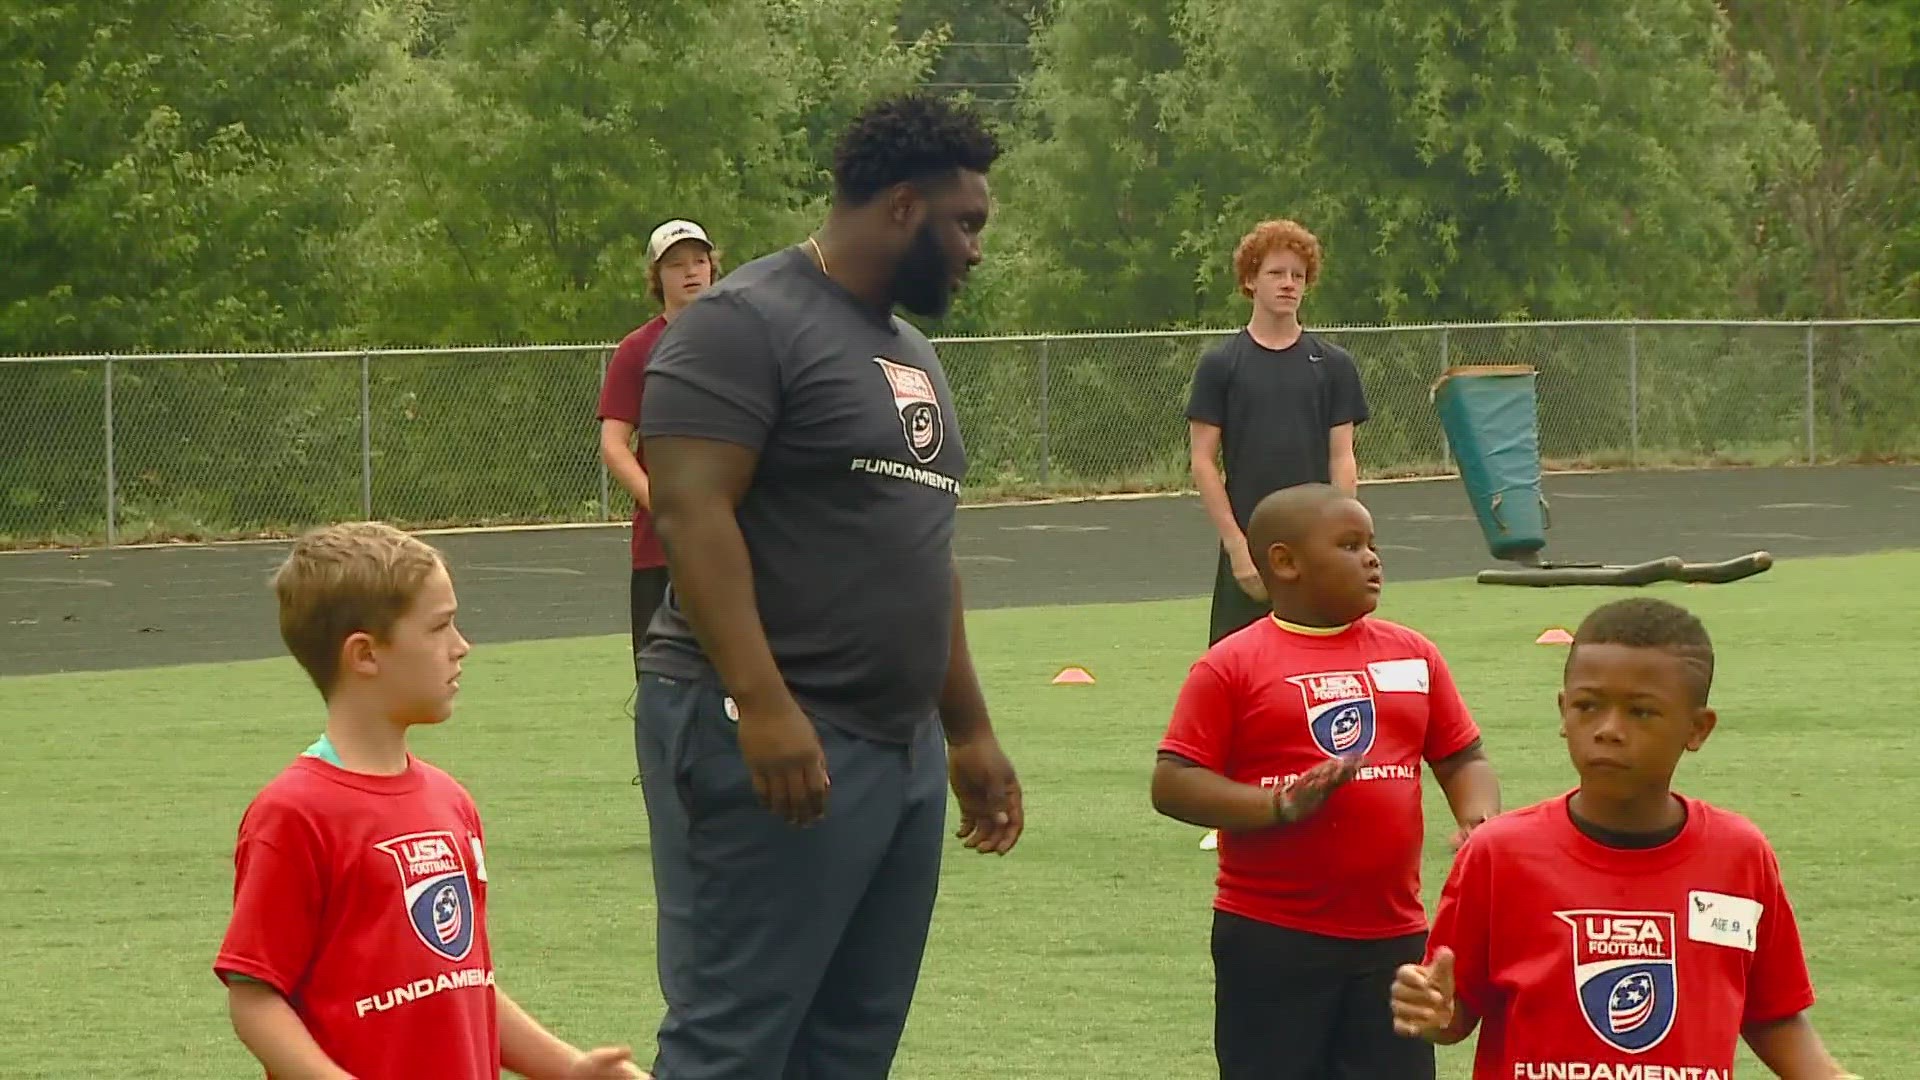 NFL player, DJ Reader, is working to open a safe, educational space for children in the Triad.